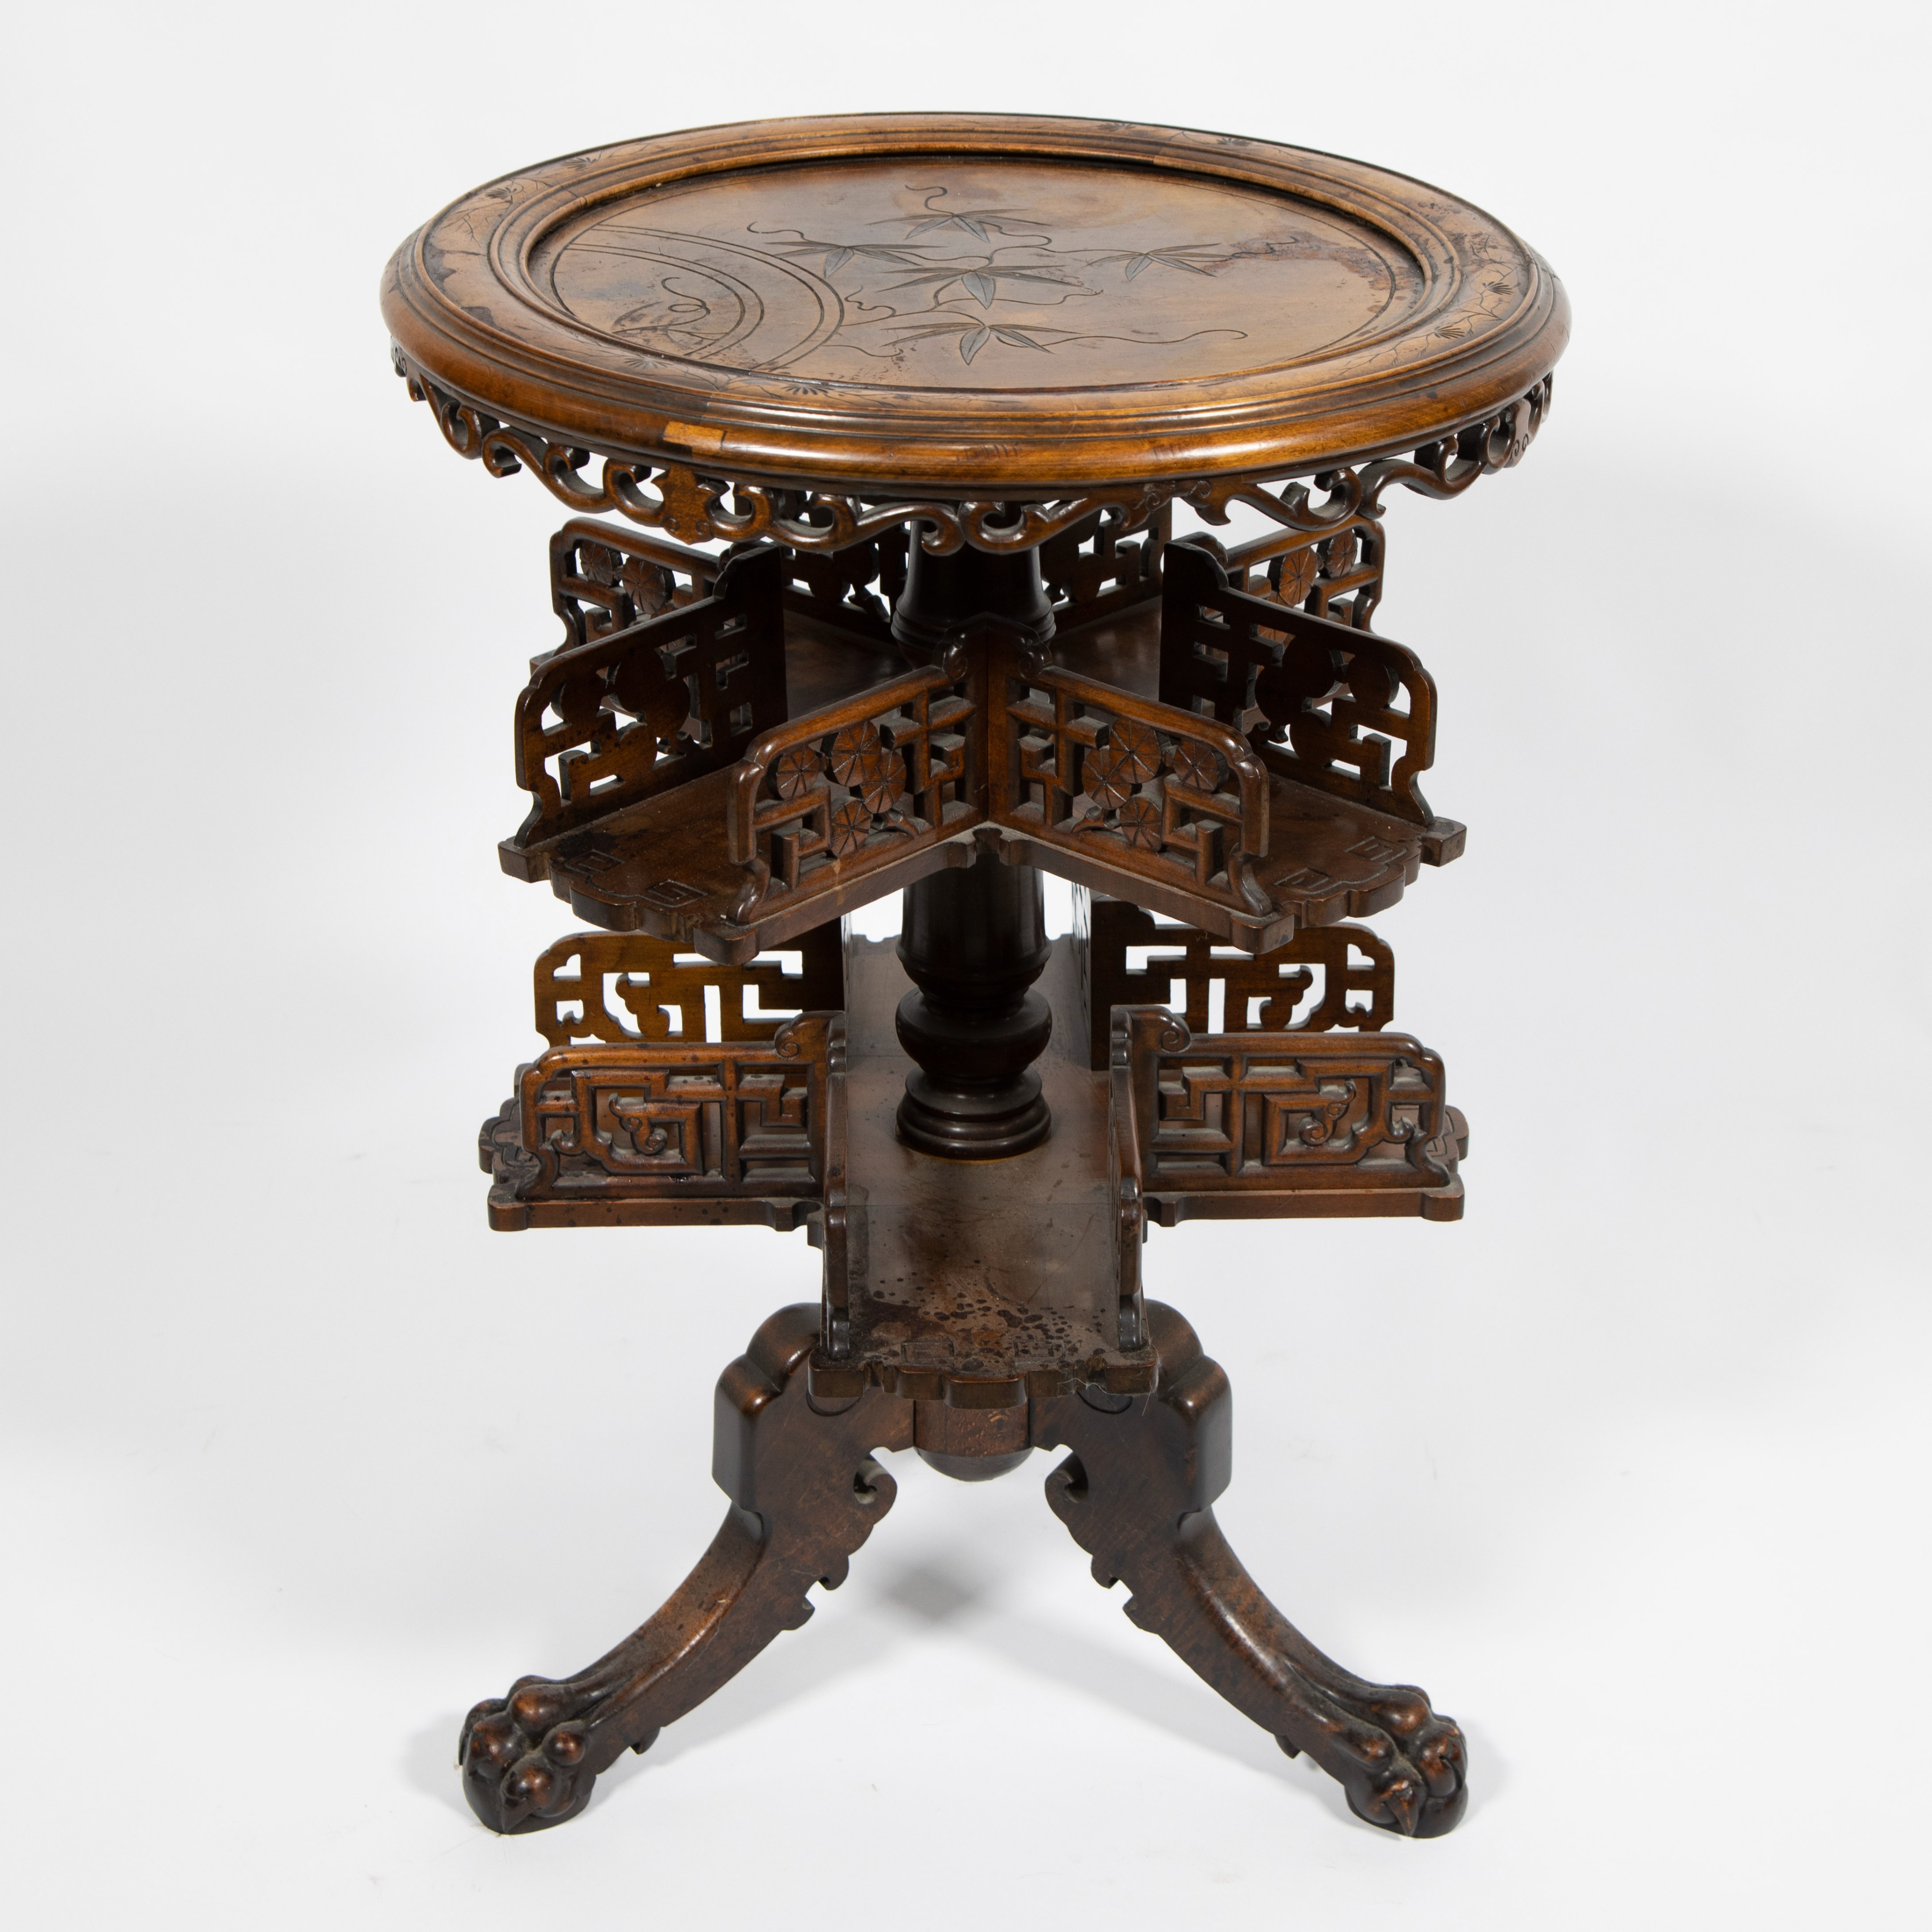 French round tablewith revolving book stand in the style of Gabriel Viardot, circa 1880